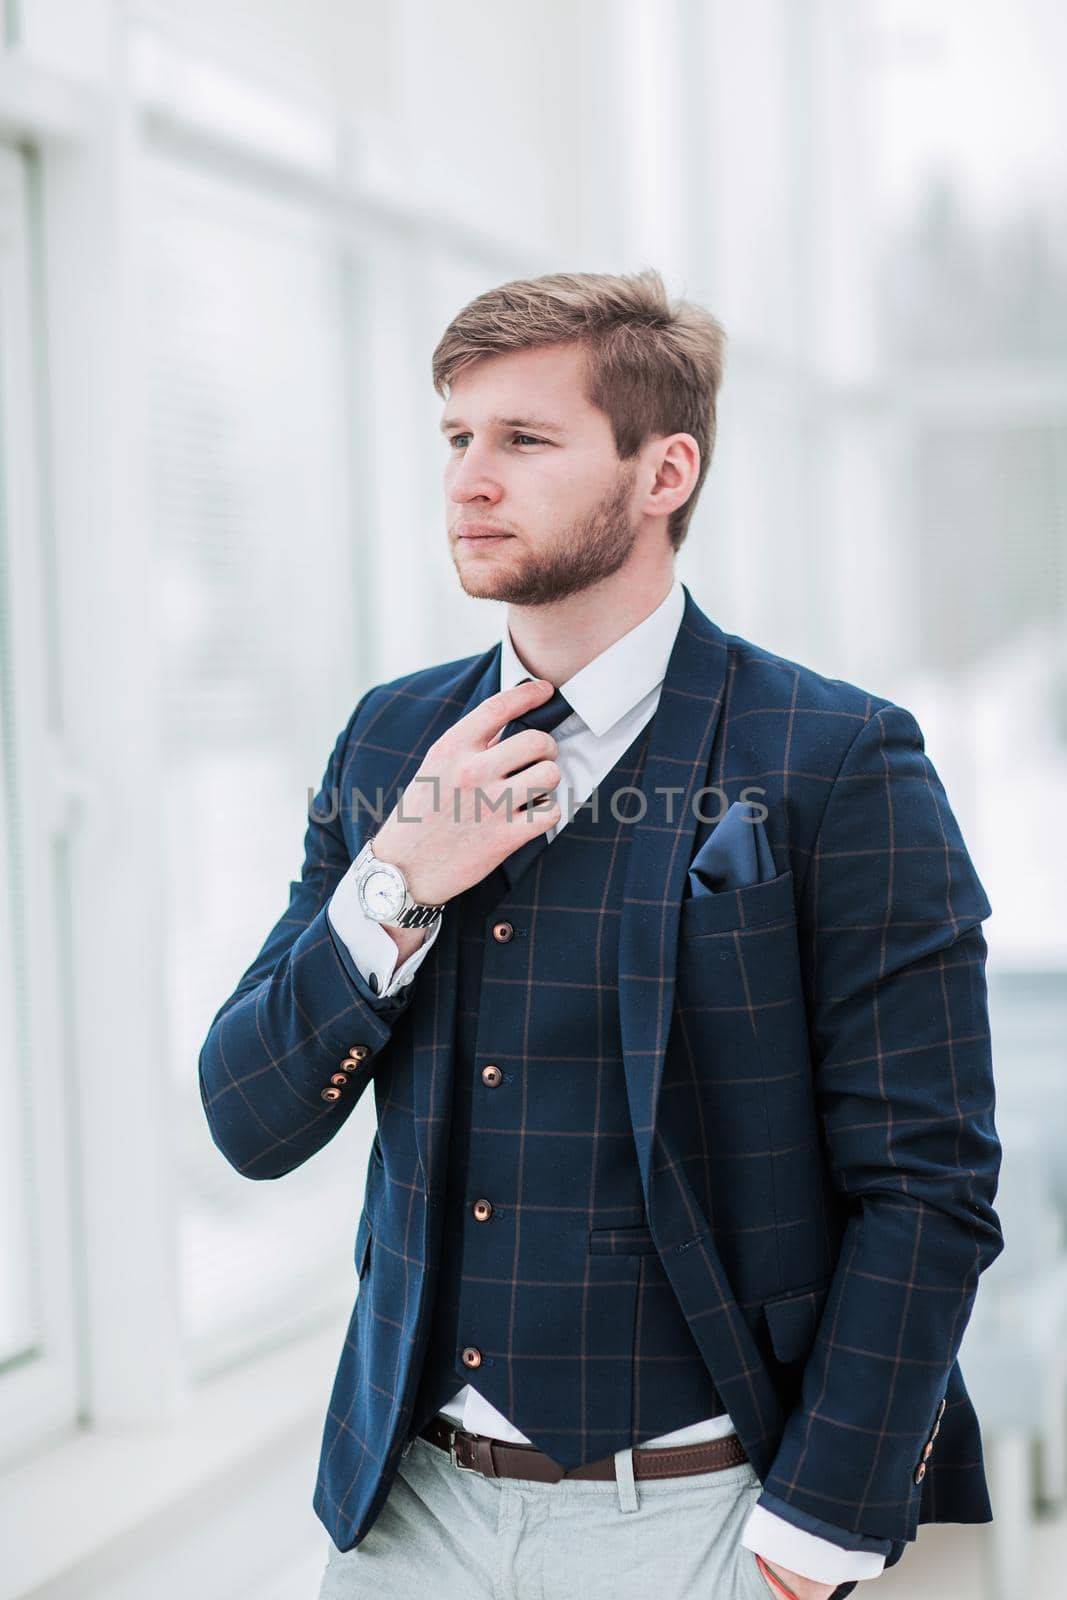 pensive newcomer businessman in a business suit stands near the window and straightens his tie .the photo has a empty space for your text